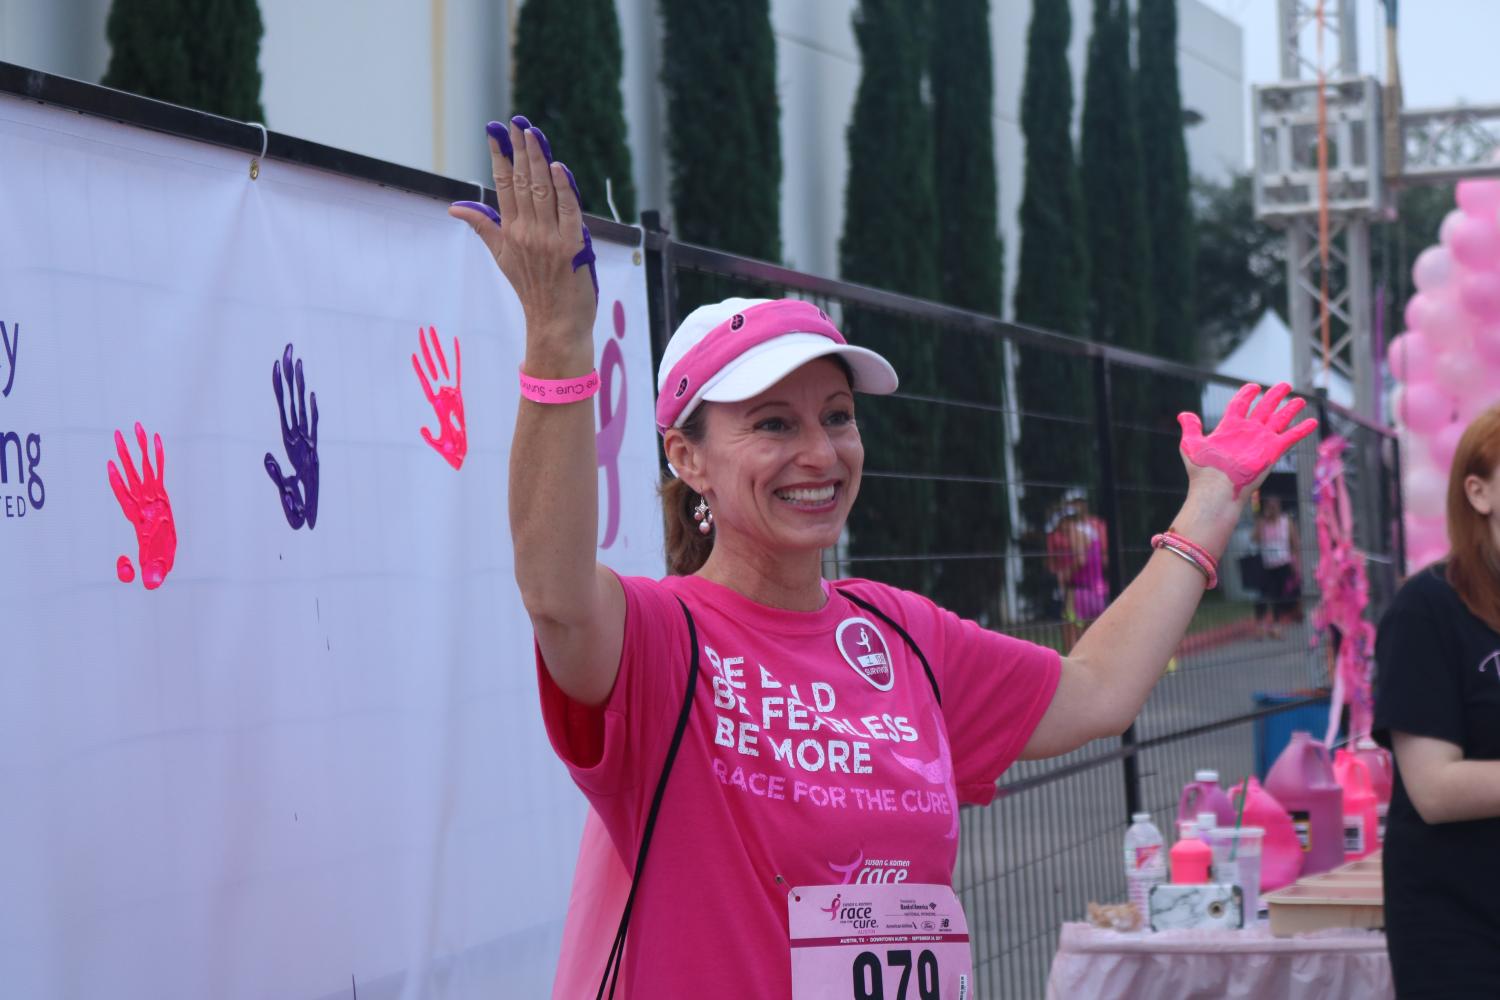 Race+for+the+Cure+Raises+Money+and+Awareness+for+Breast+Cancer